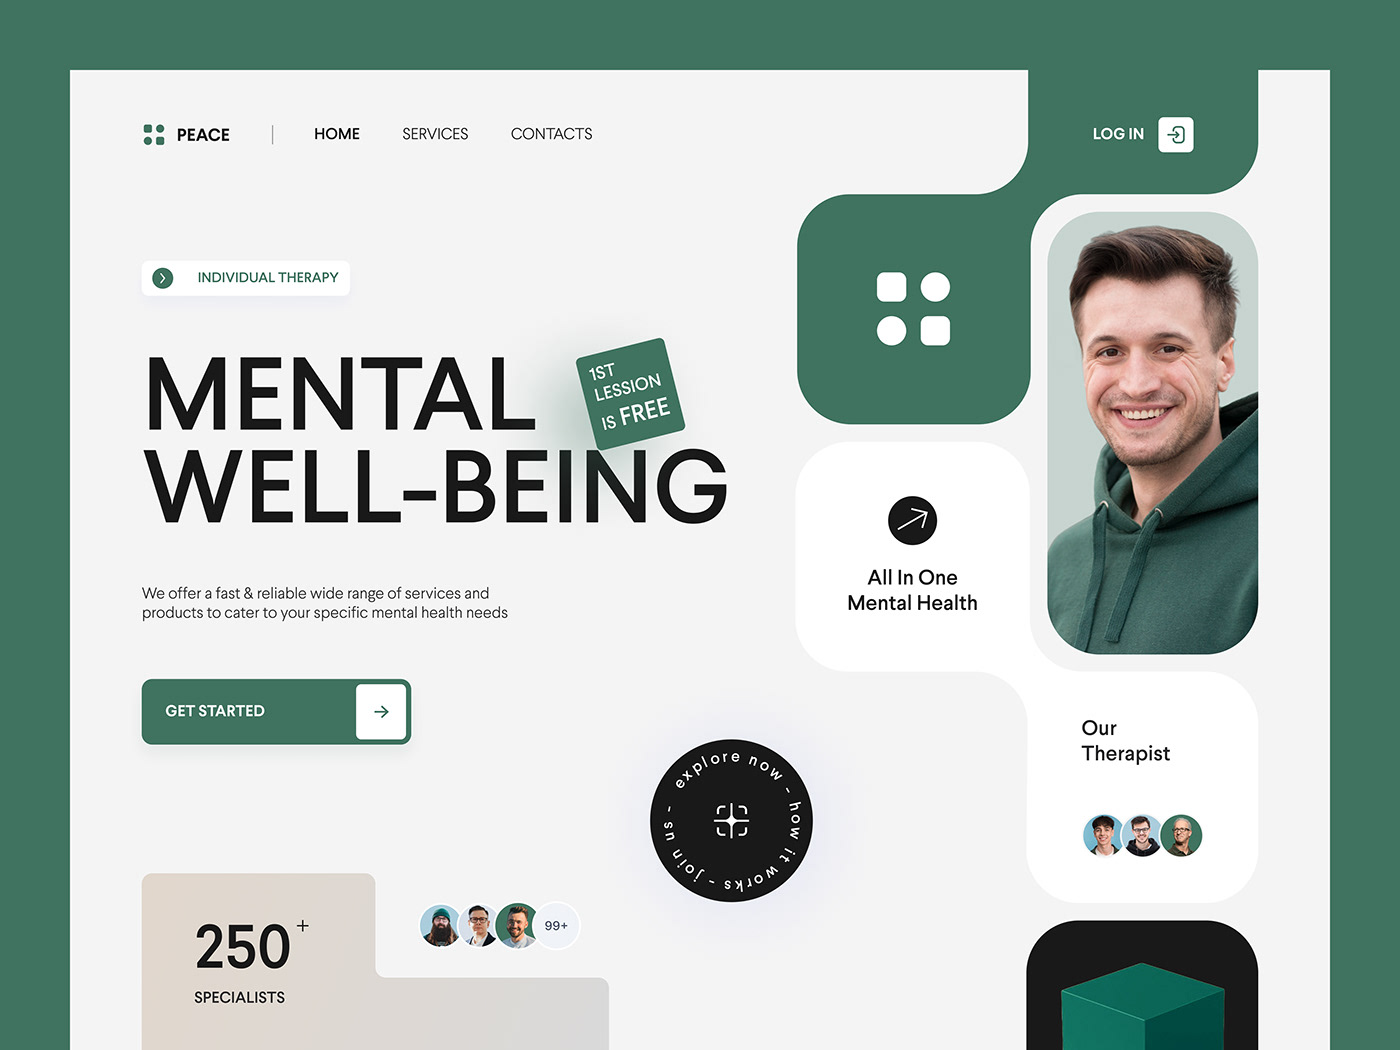 Immerse yourself in a visually pleasing journey on our Mental Well-Being platform by Buraq Lab.